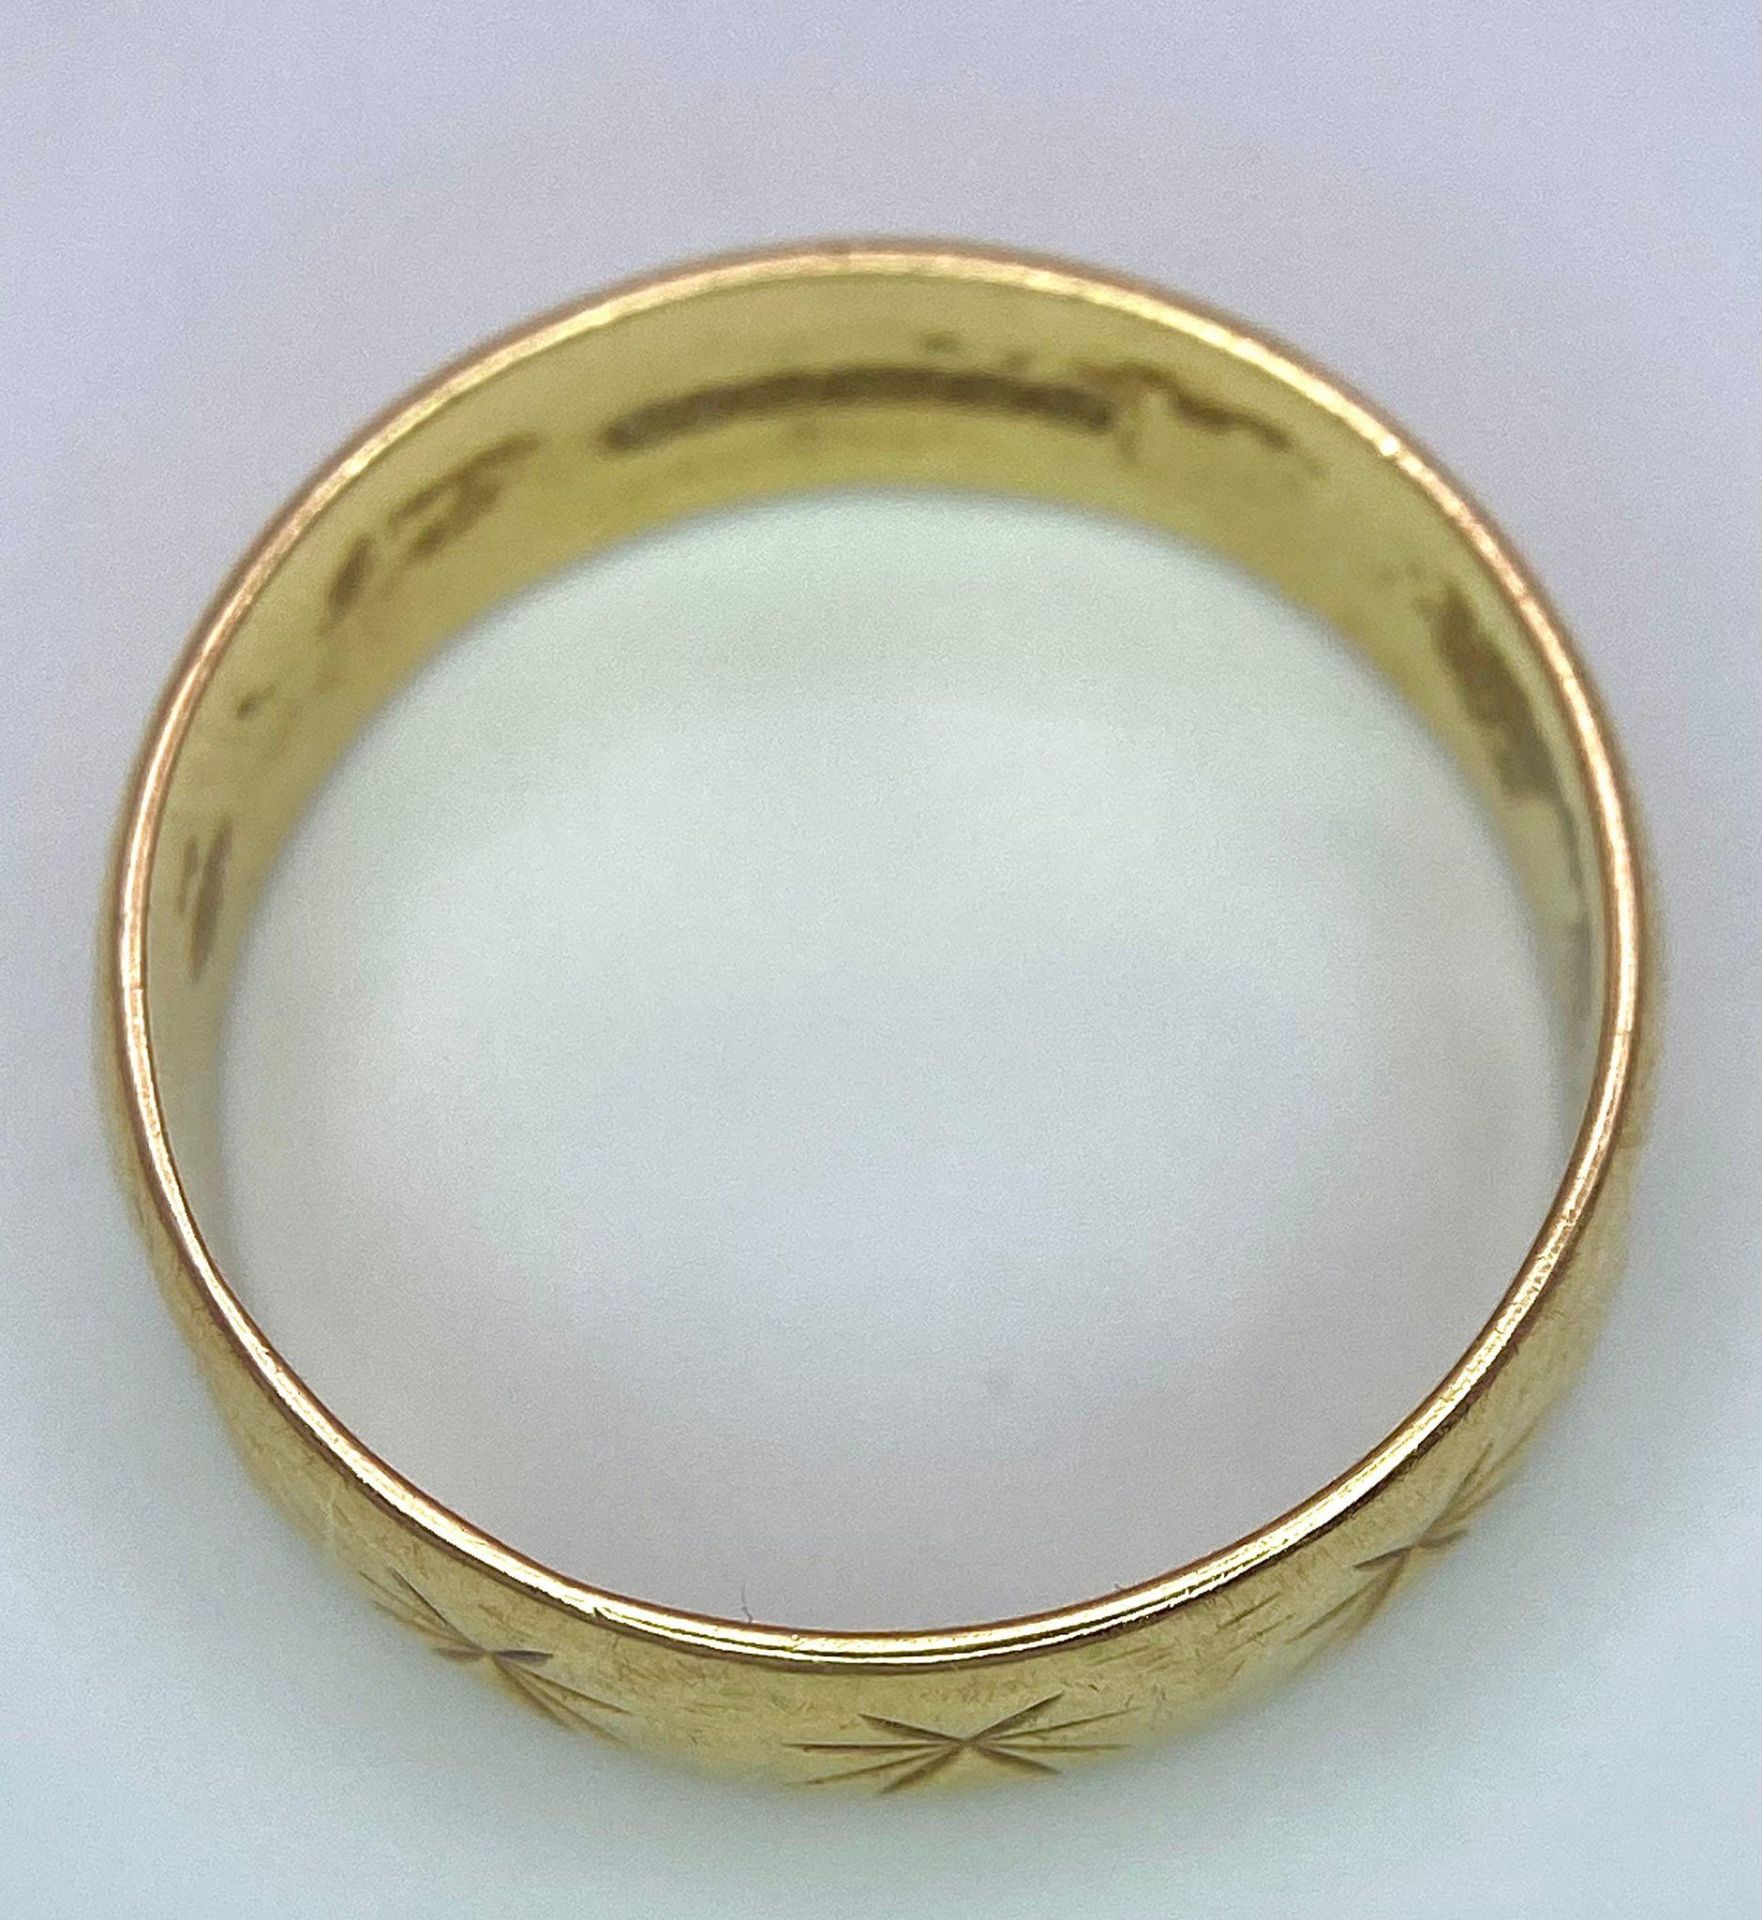 A Vintage 9K Yellow Gold Band Ring with Star Decoration. 5mm width. Size M. 2.8g weight. - Image 5 of 6